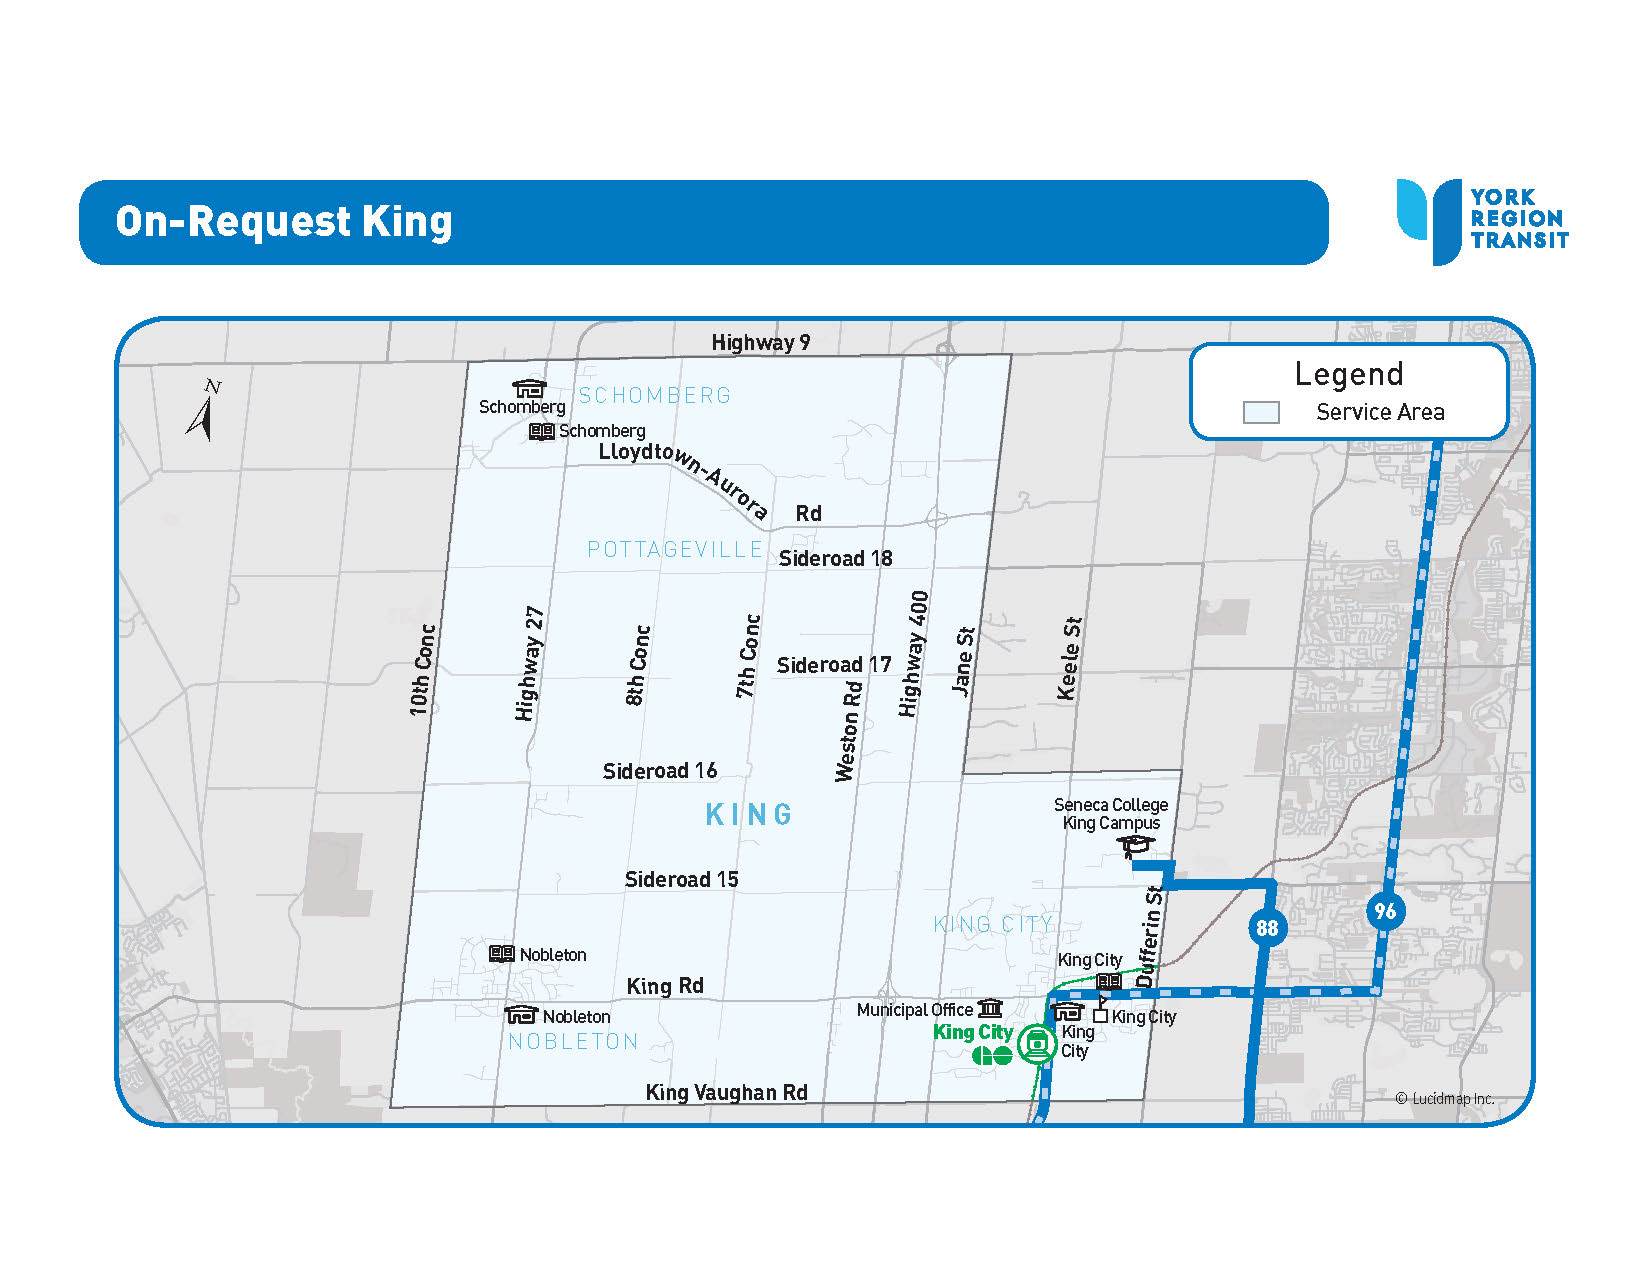 On-Request King Service Area Map